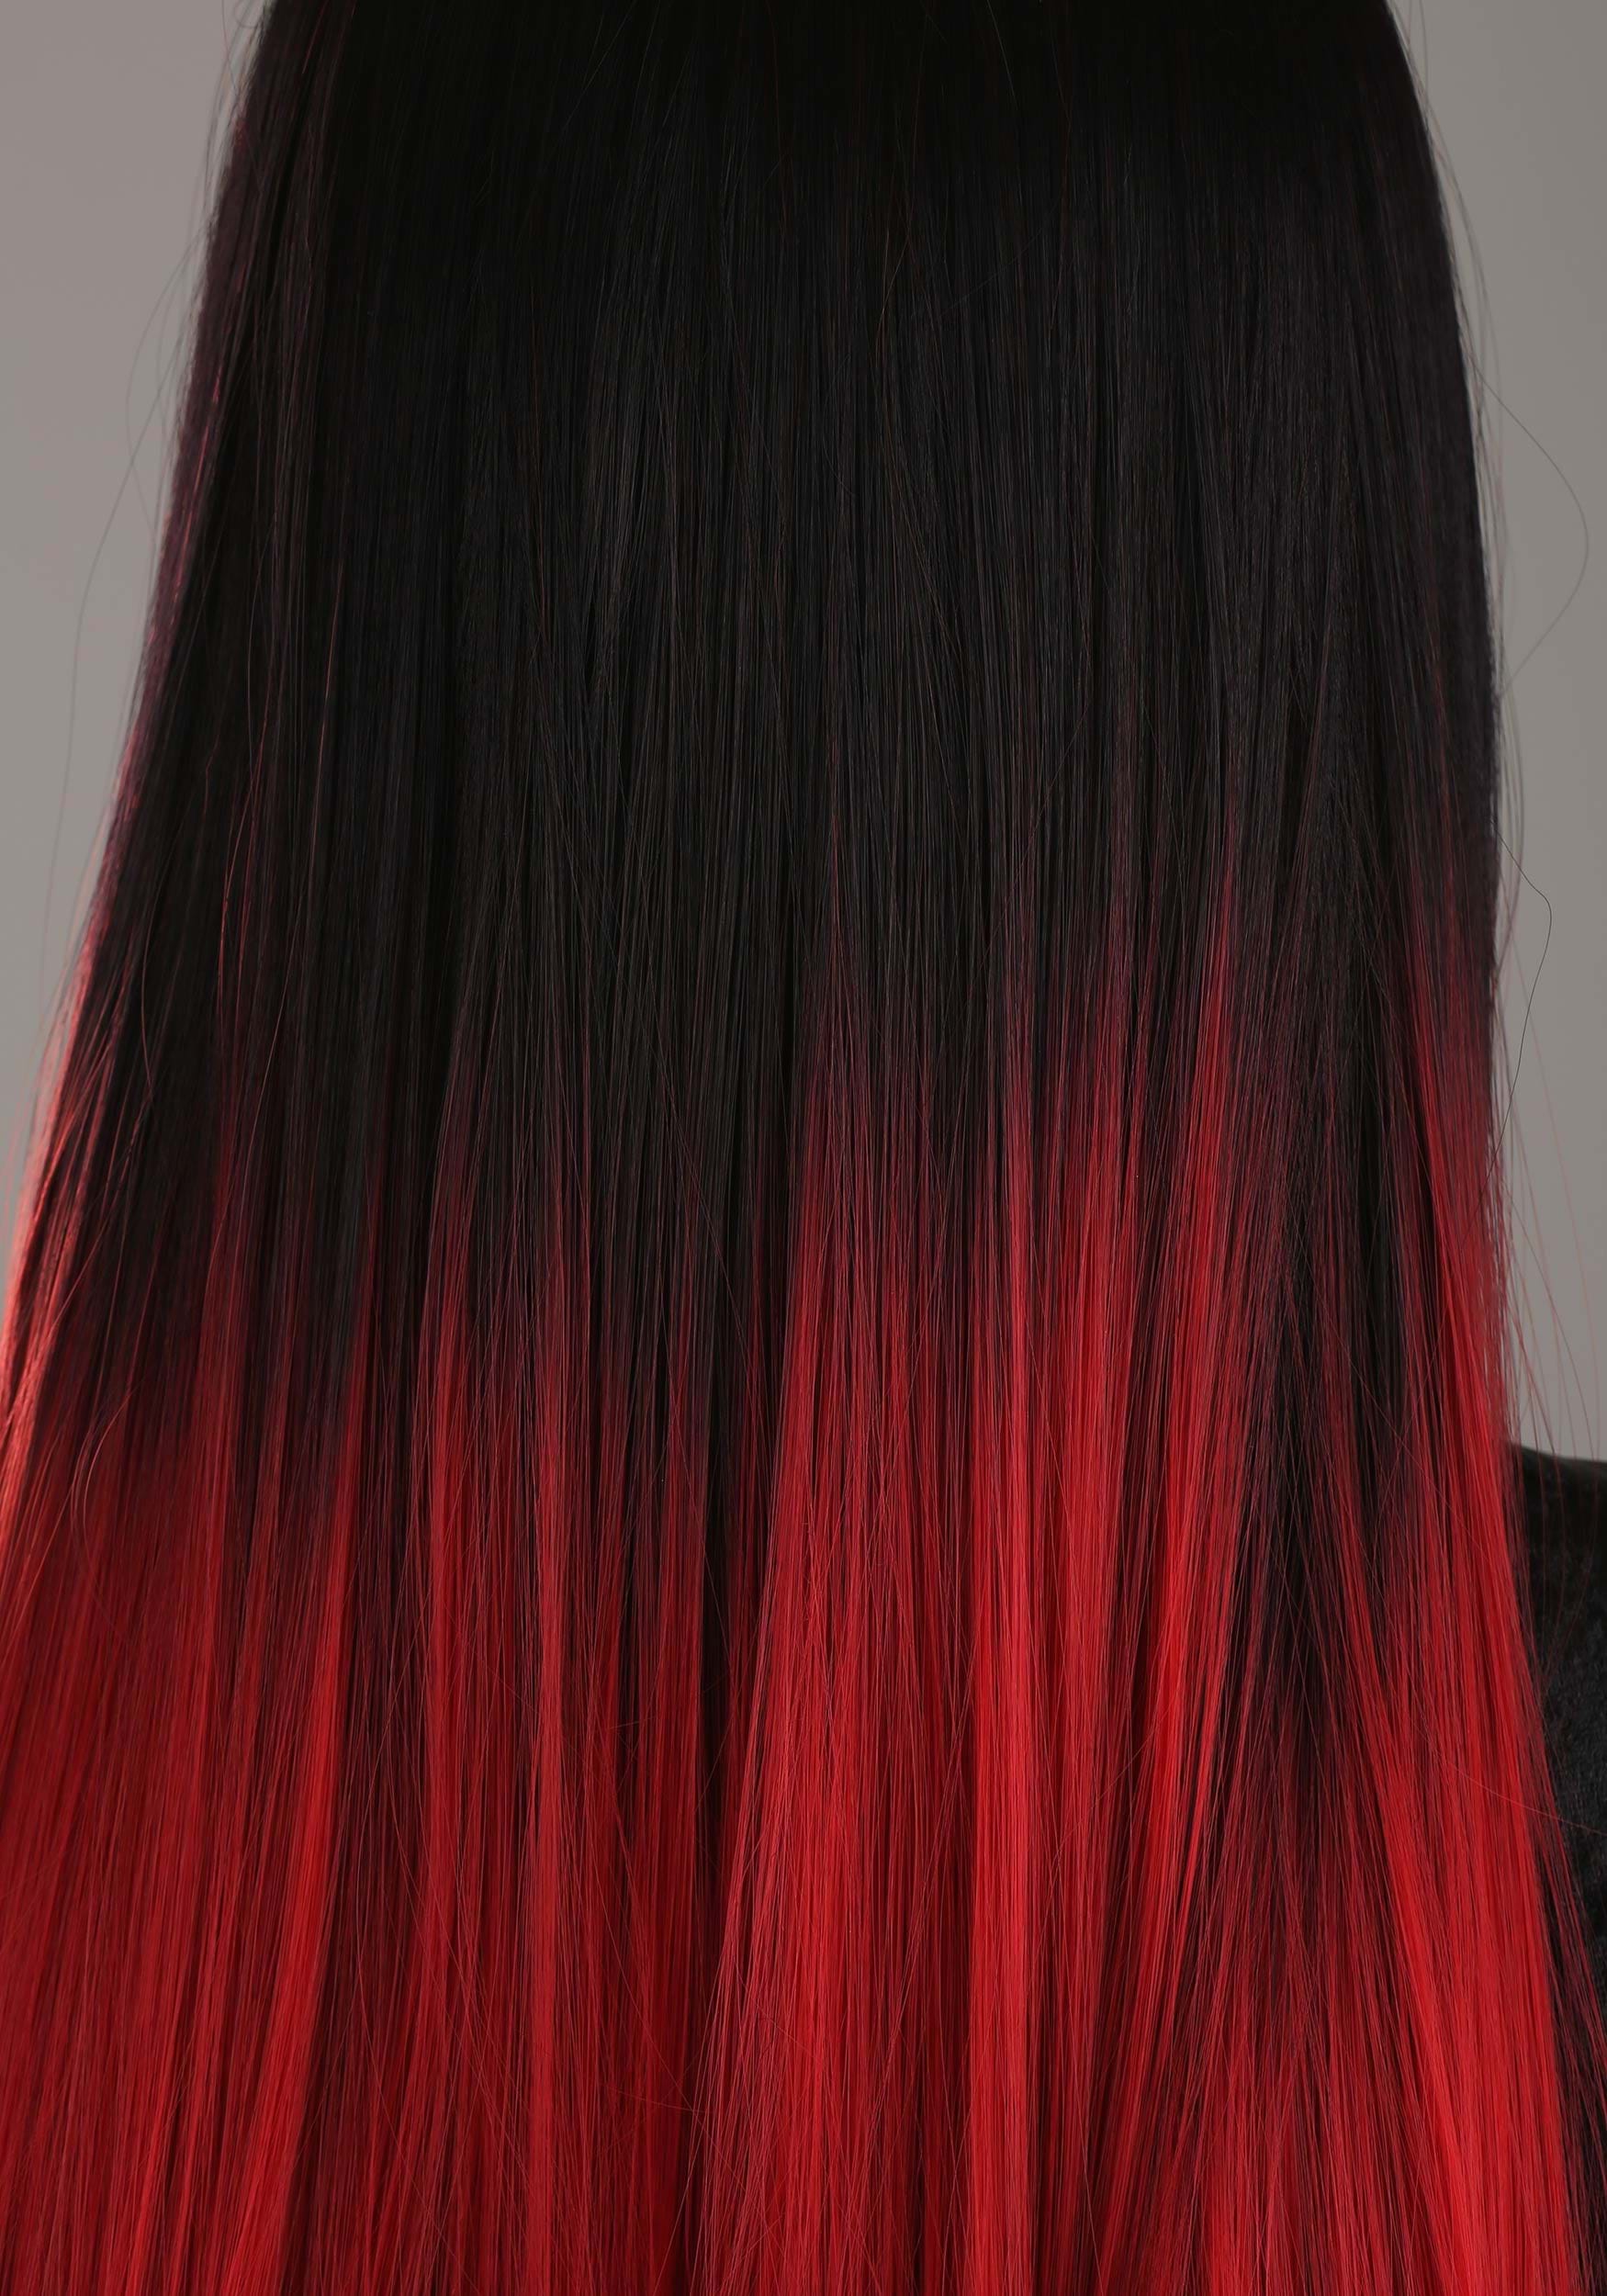 https://images.fun.com/products/67076/2-1-187617/black-and-red-ombre-wig-alt-3.jpg